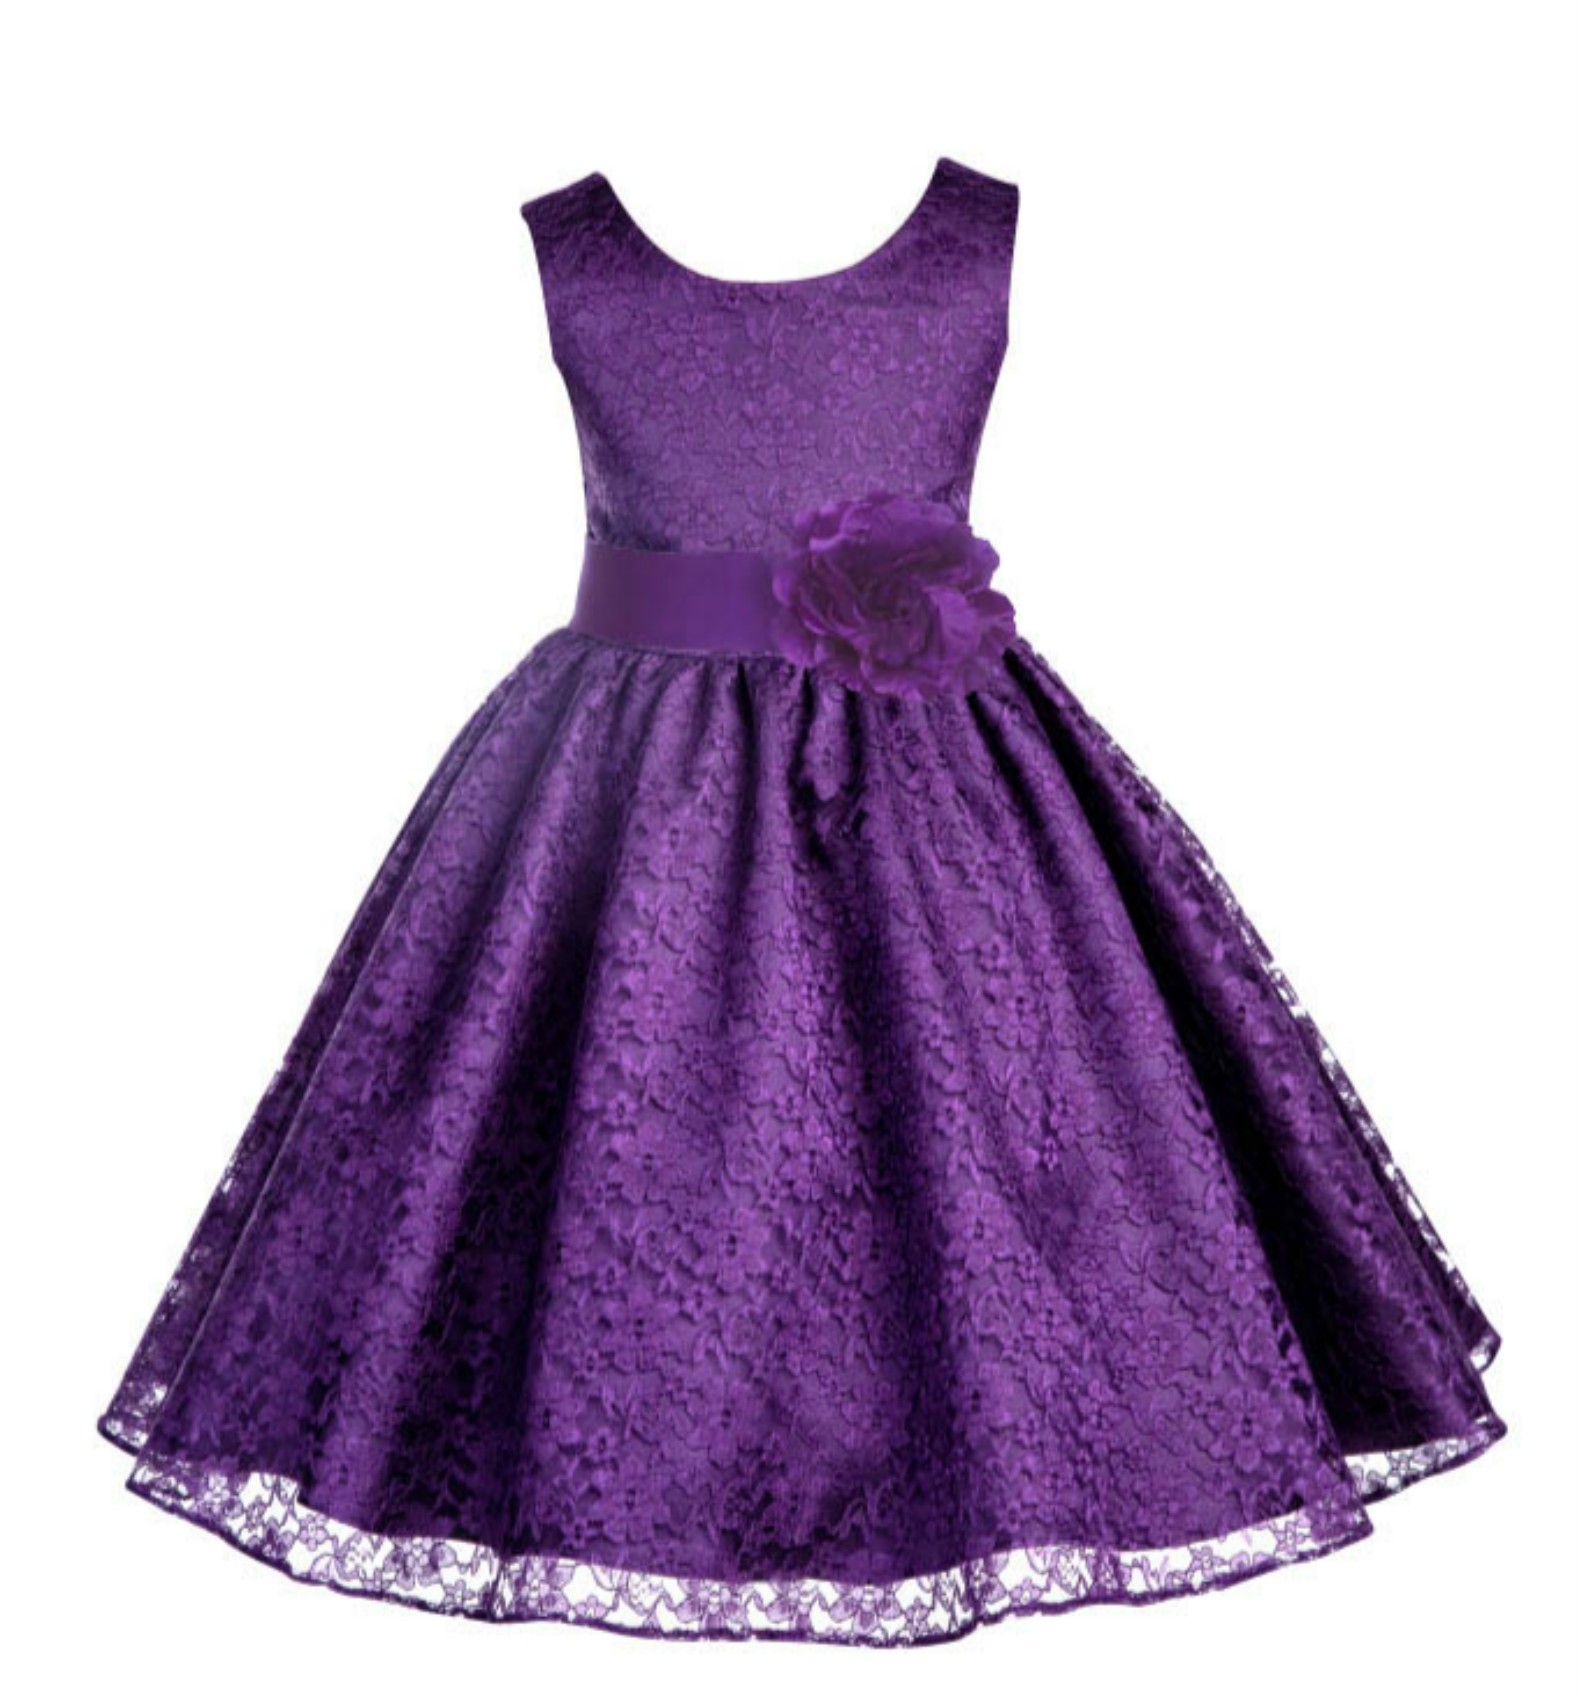 Purple Floral Lace Overlay Flower Girl Dress Formal Beauty 163S